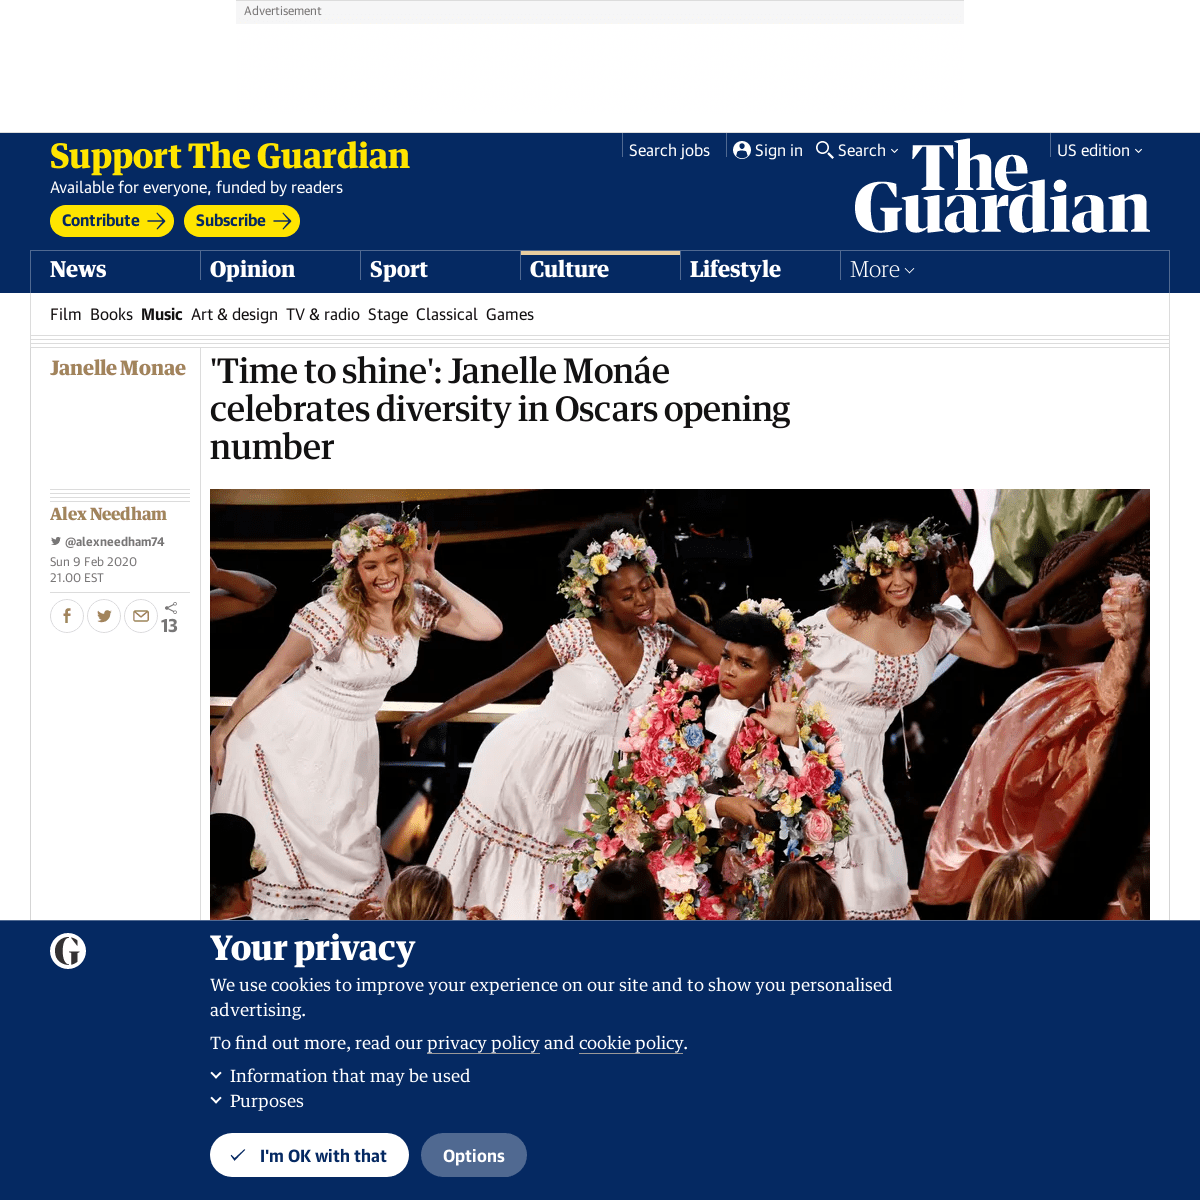 A complete backup of www.theguardian.com/music/2020/feb/10/janelle-monae-celebrates-diversity-oscars-opening-number